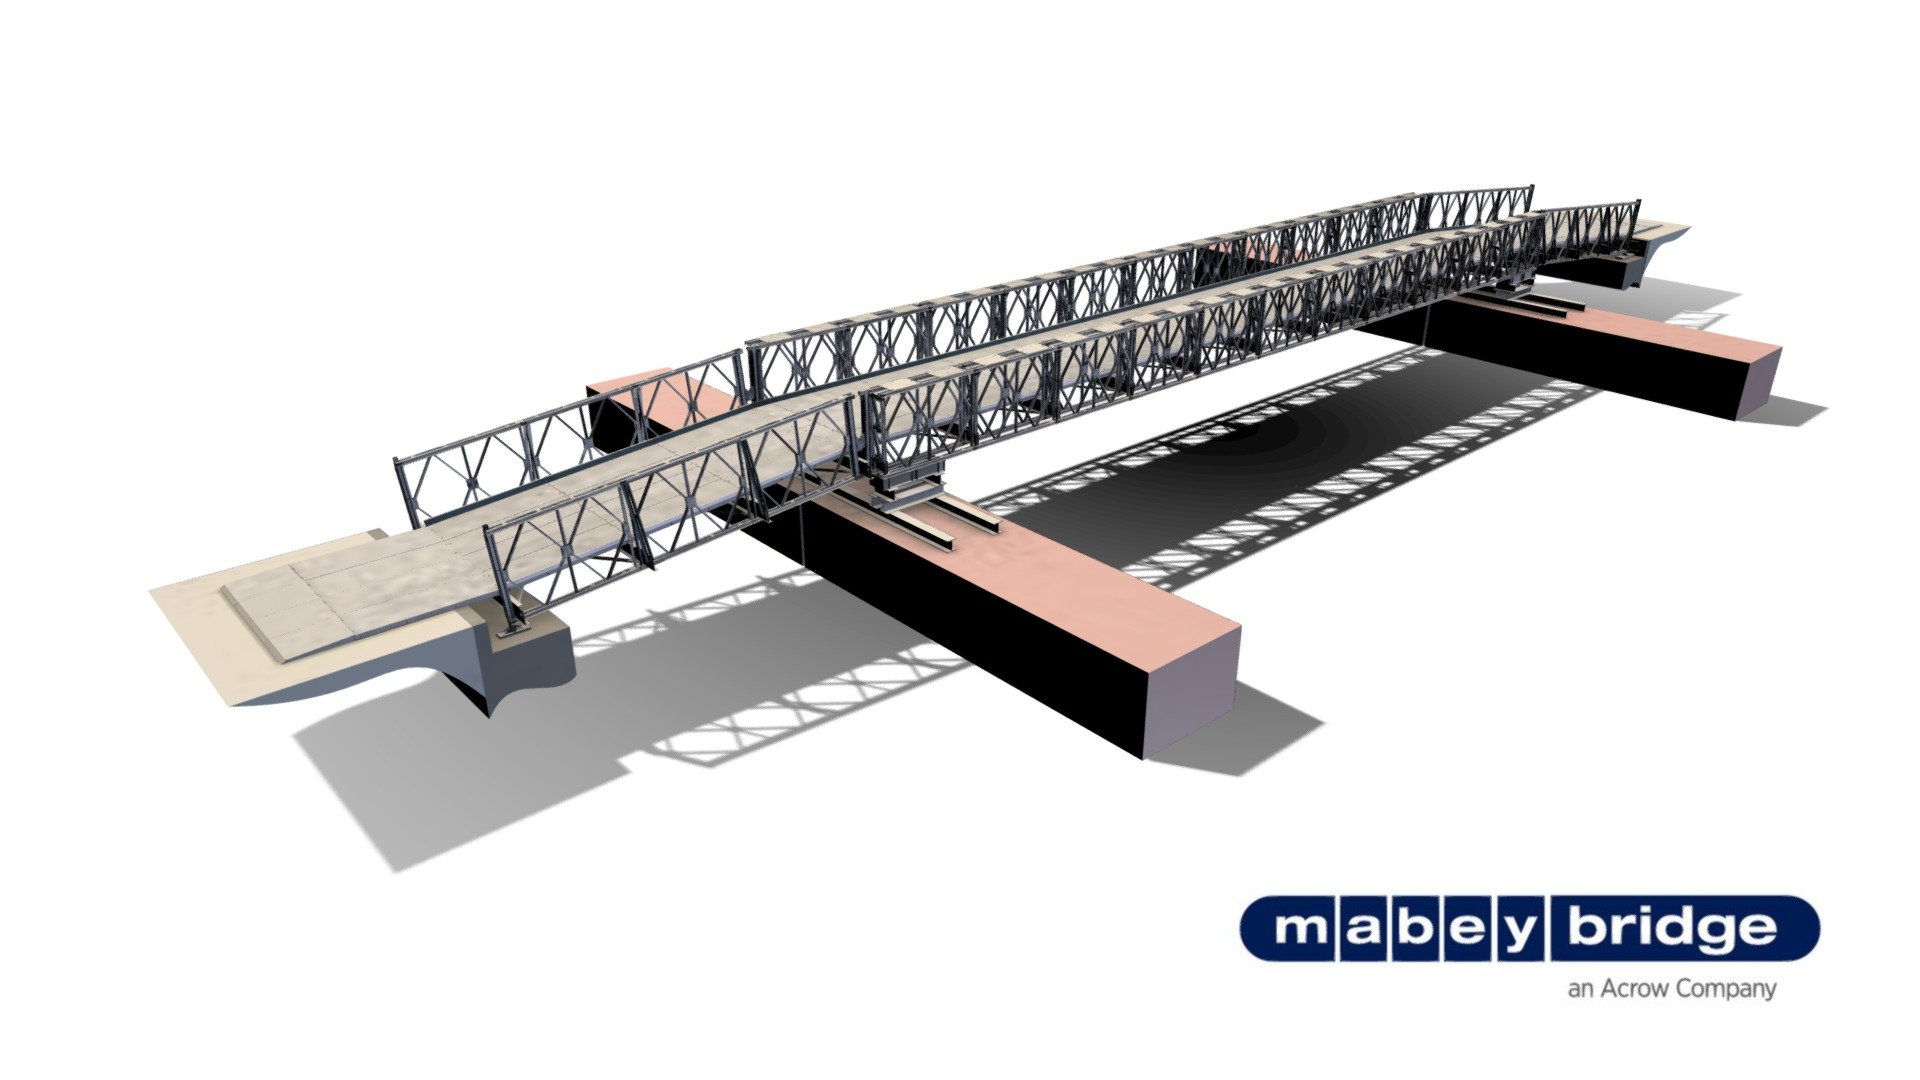 CThe Compact 200™ (C200™) system is Mabey’s most widely used modular bridging product and is available for both permanent and temporary applications. With a heritage stretching back over 70 years to the original Bailey Bridge system, the system’s extensive use worldwide pays testament to its versatility.

The compact bridge system uses standard, interchangeable steel components to provide robust, rapidly deployed and erected solutions for; permanent bridges, temporary bridges, rural bridges, access bridges, footbridges and emergency and contingency bridging applications.

VISIT WWW.MABEYBRIDGE.COM FOR MORE INFORMATION 3d model